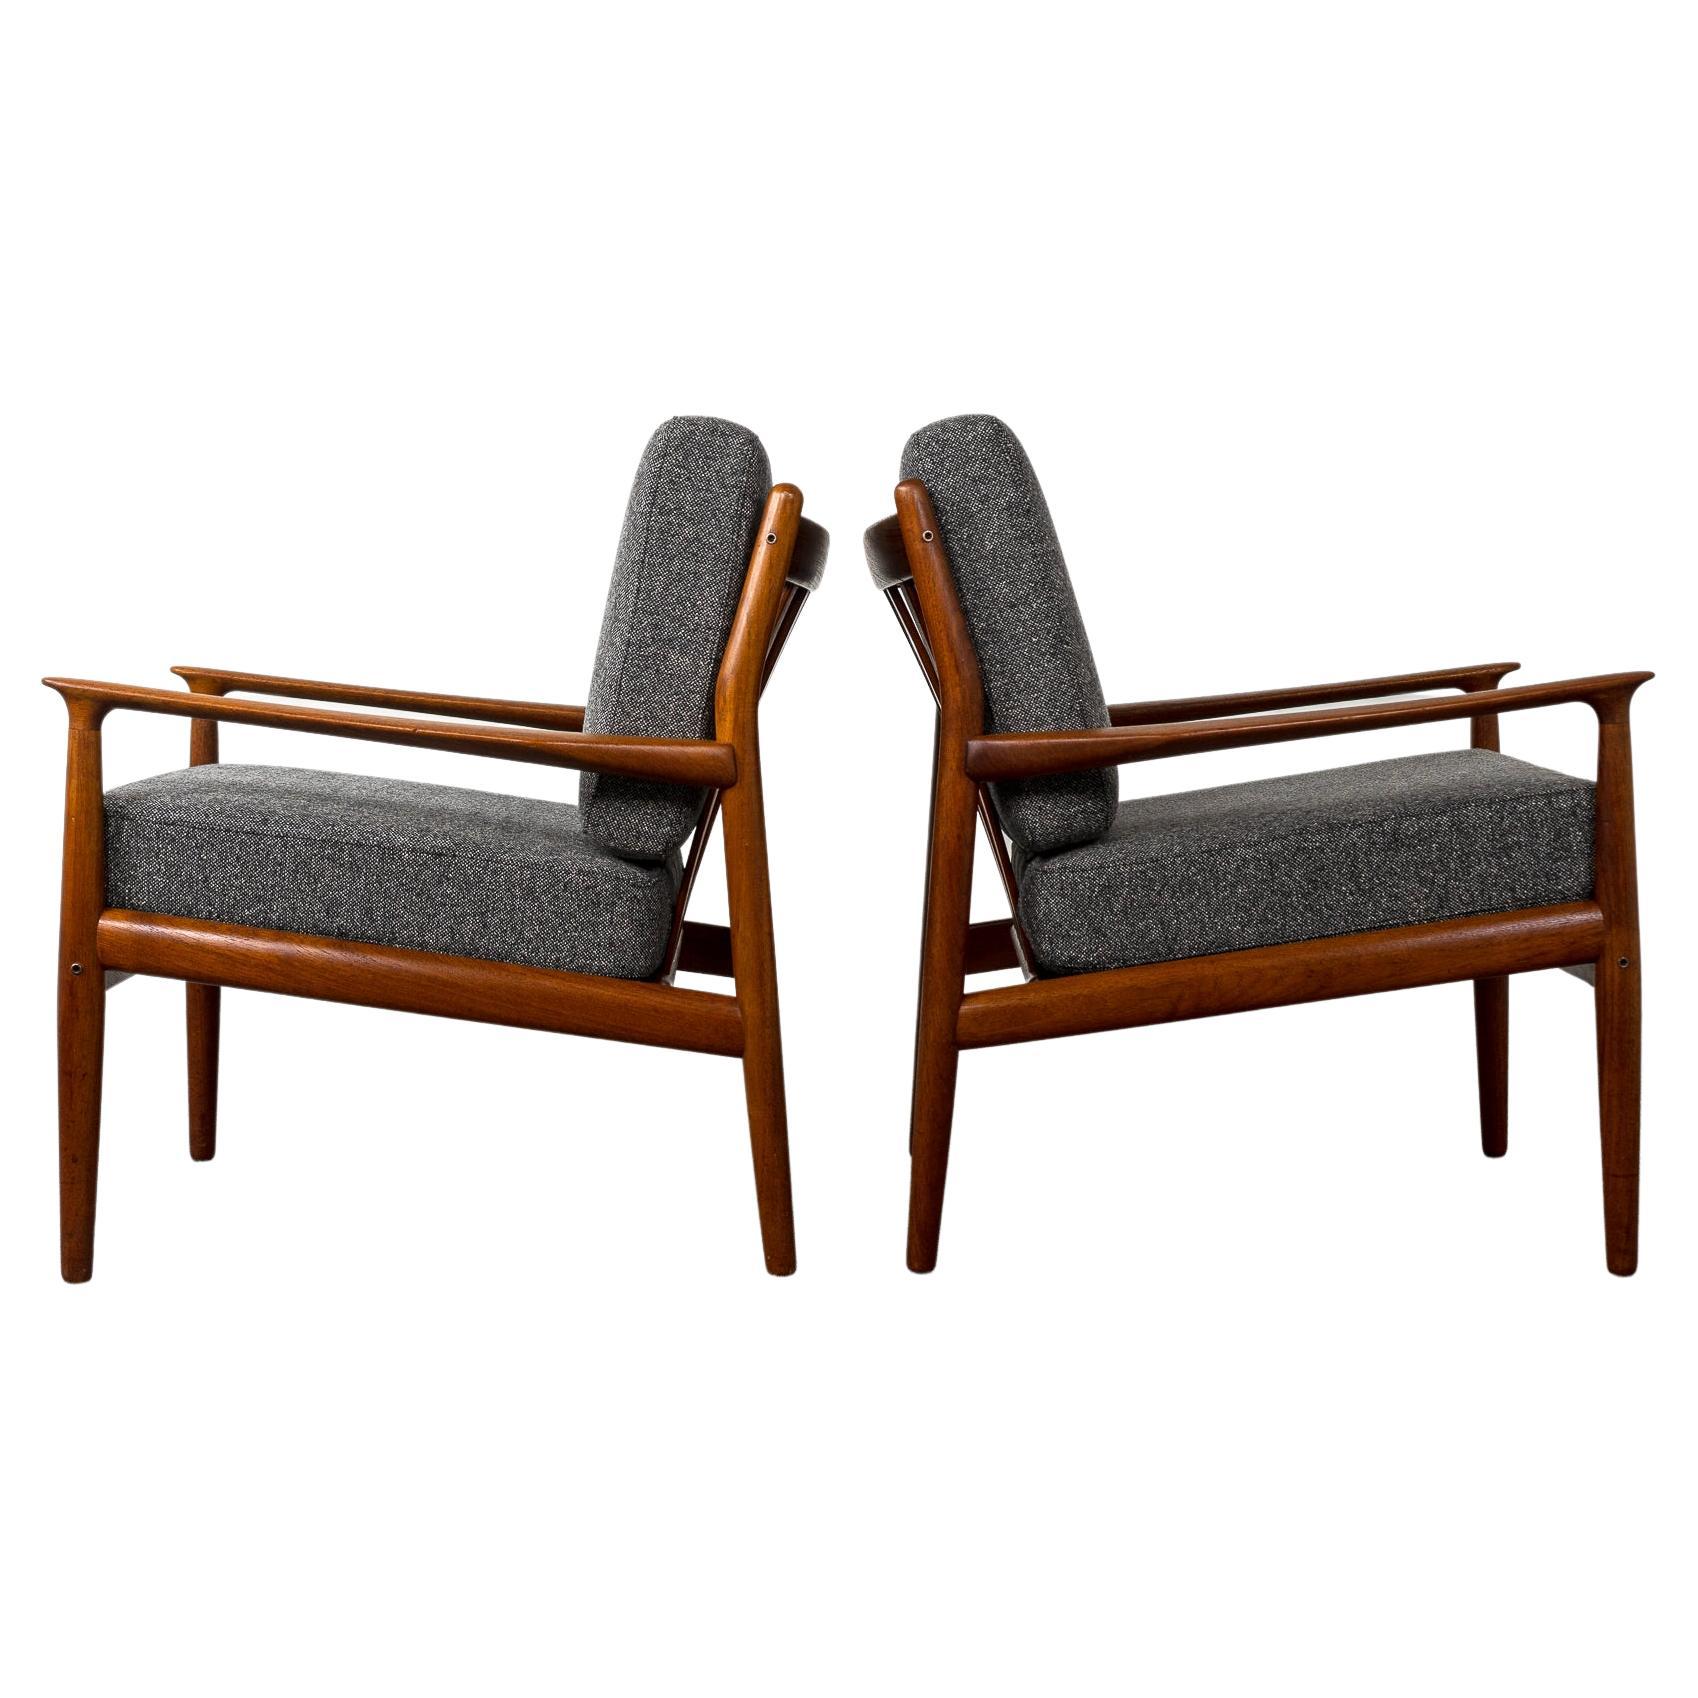 Teak Danish modern pair of exceptional lounge chairs by Svend Erikson, circa 1960's. Sultry sculpted teak frames with beautiful smooth joinery and slatted backs. Absolutely gorgeous from every angle. Excellent construction and quality, new foam and